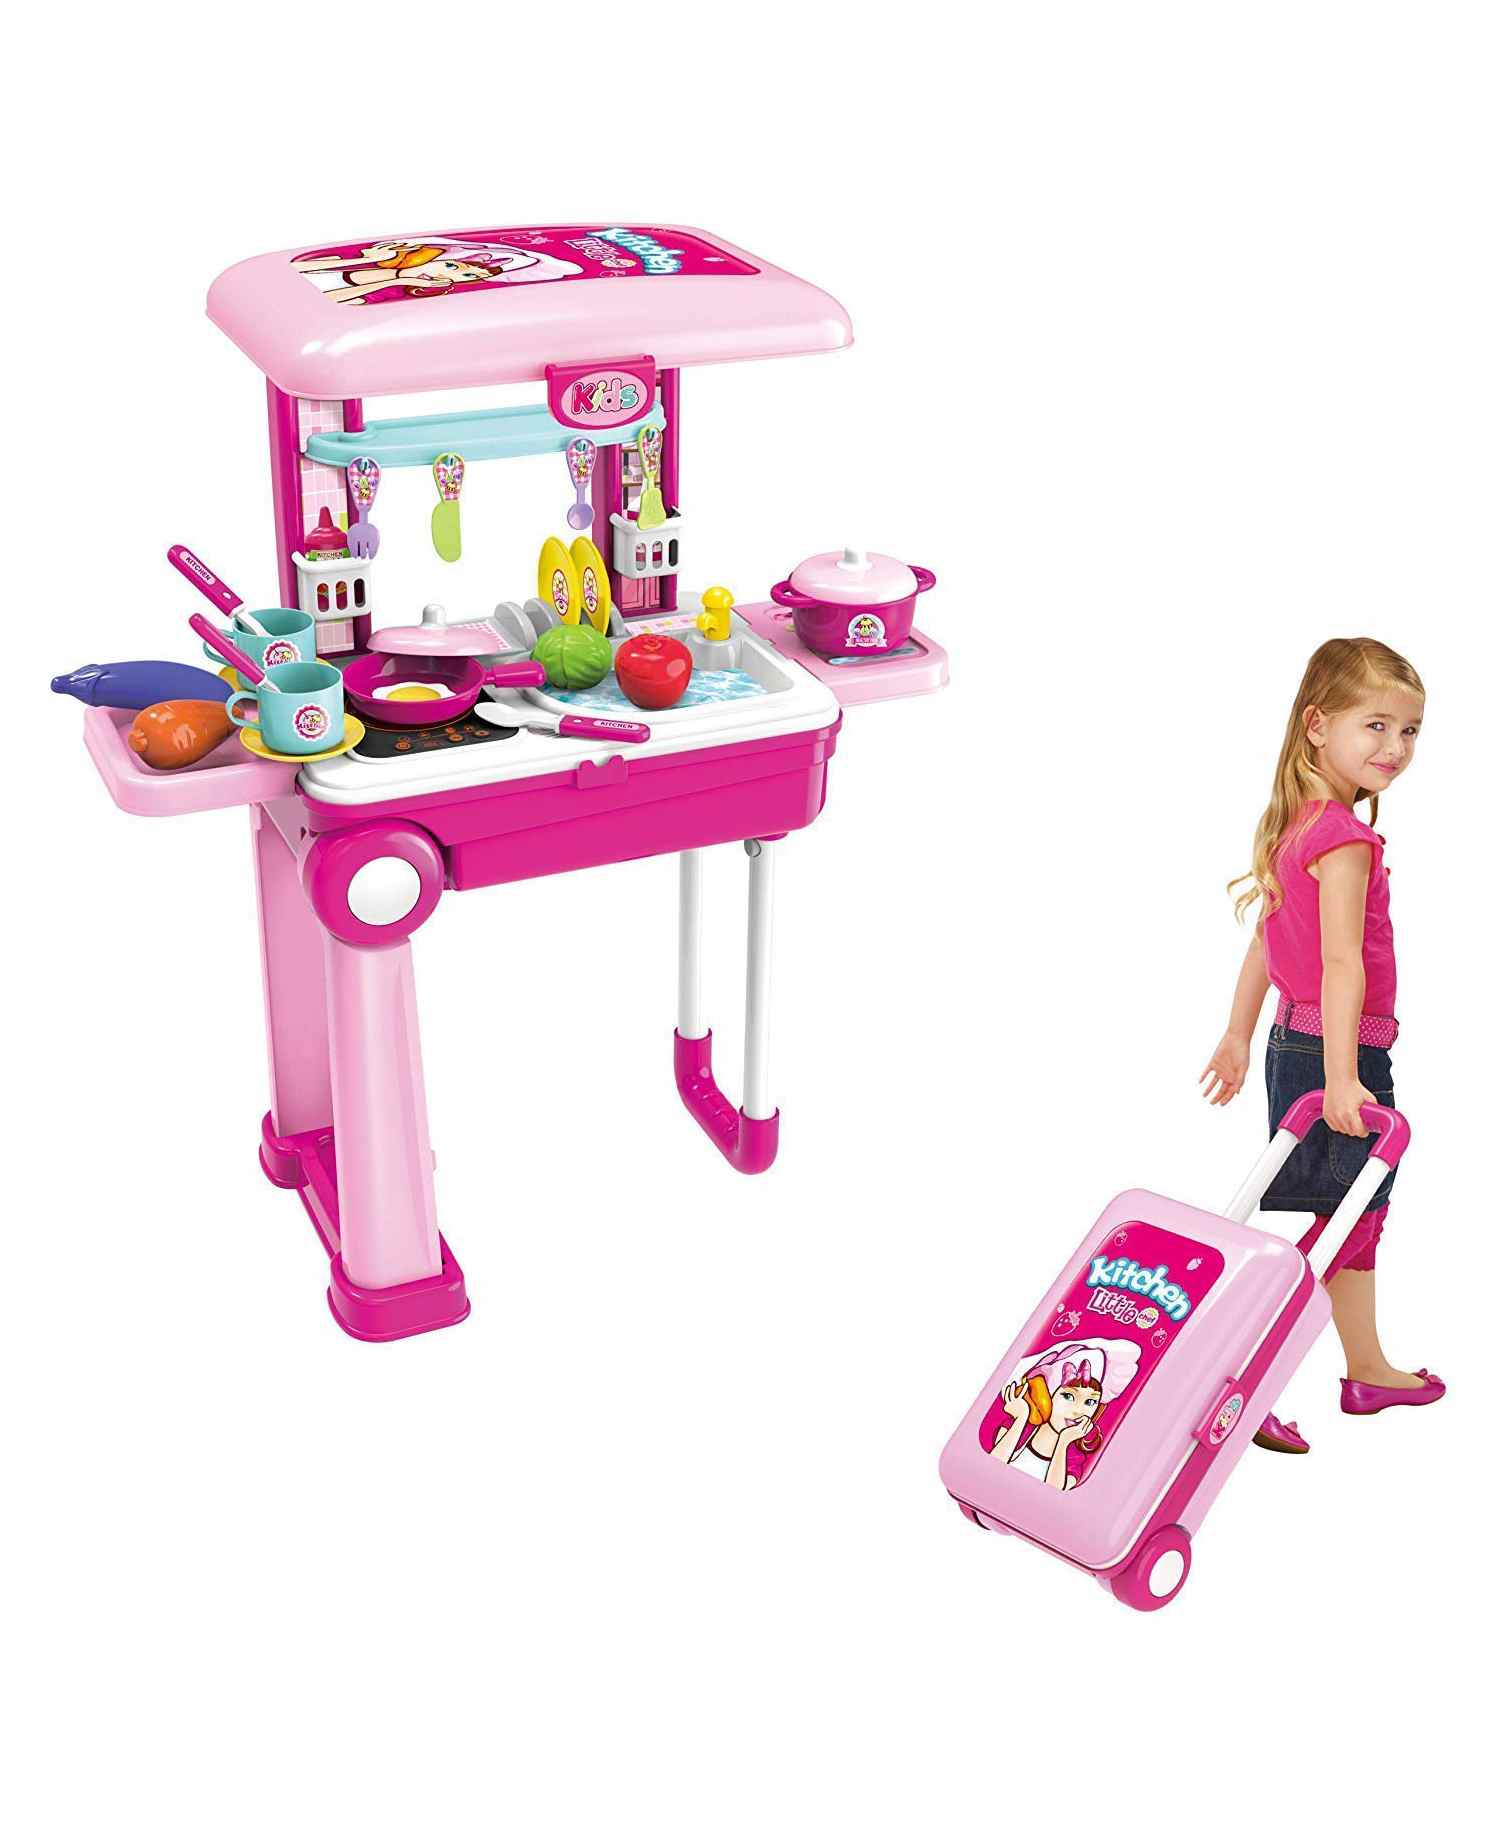 Yamama Little Chef Kitchen Set Pink Online India Buy Pretend Play Toys For 3 8 Years At Firstcry Com 8046721